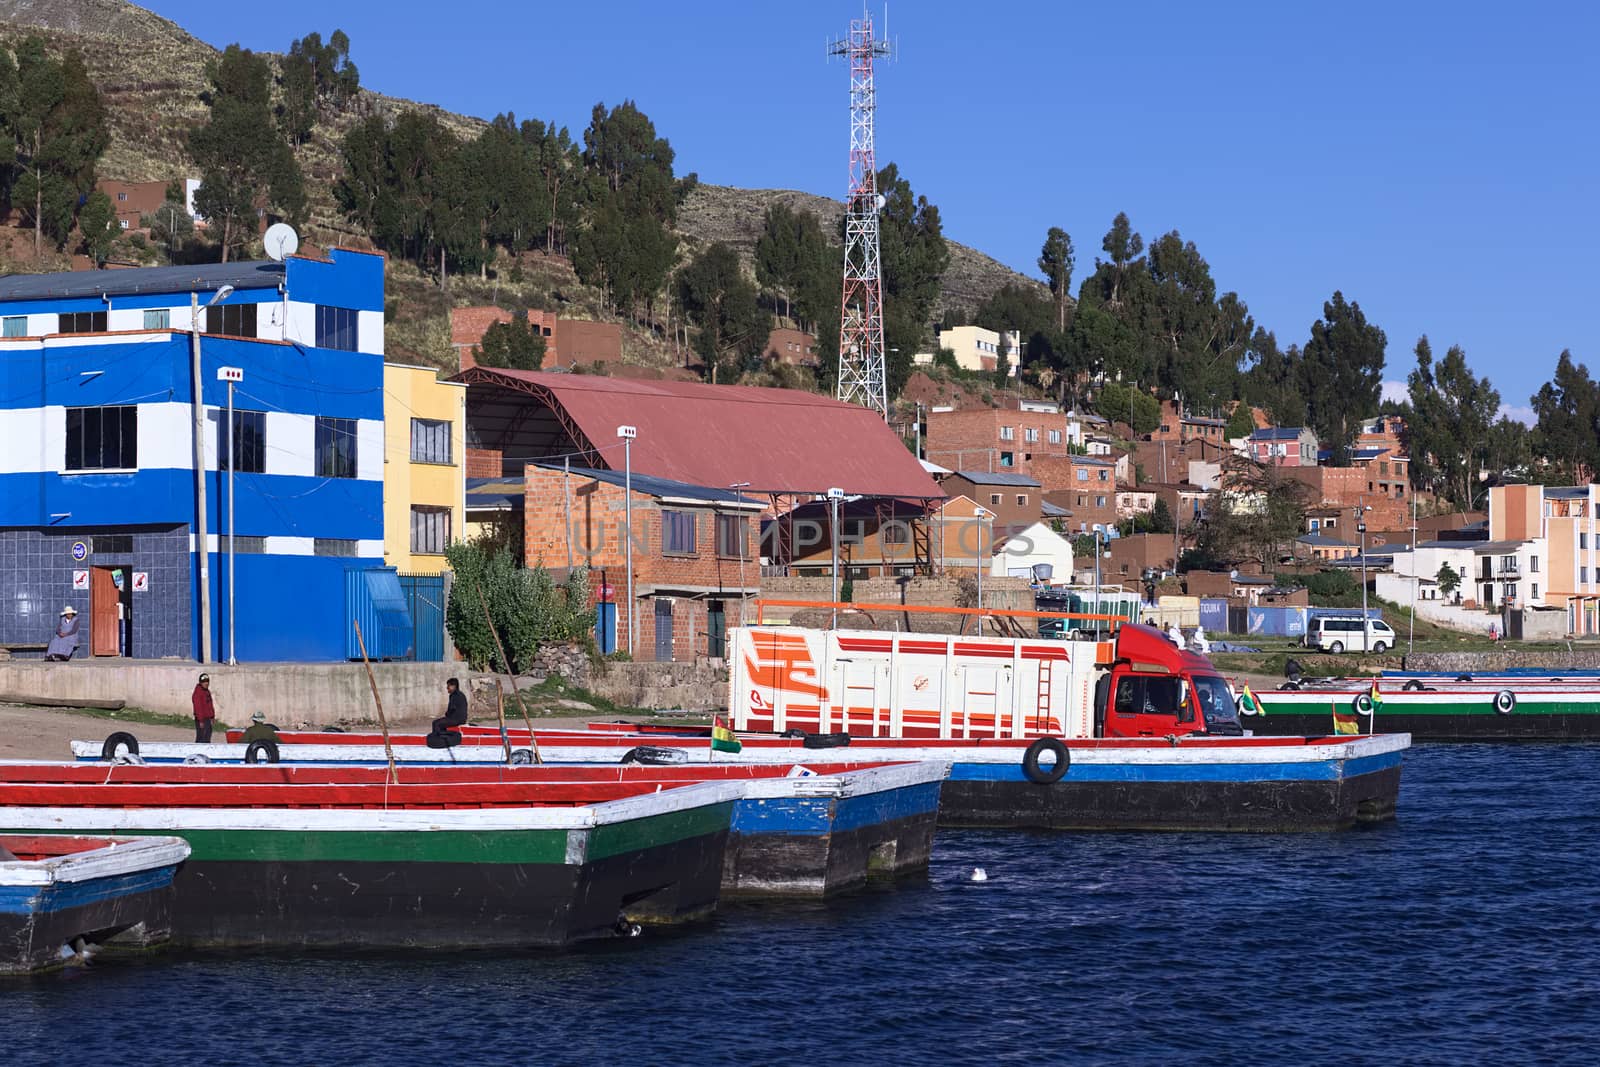 Truck on Ferry on the Shore of  Lake Titicaca in Bolivia by ildi